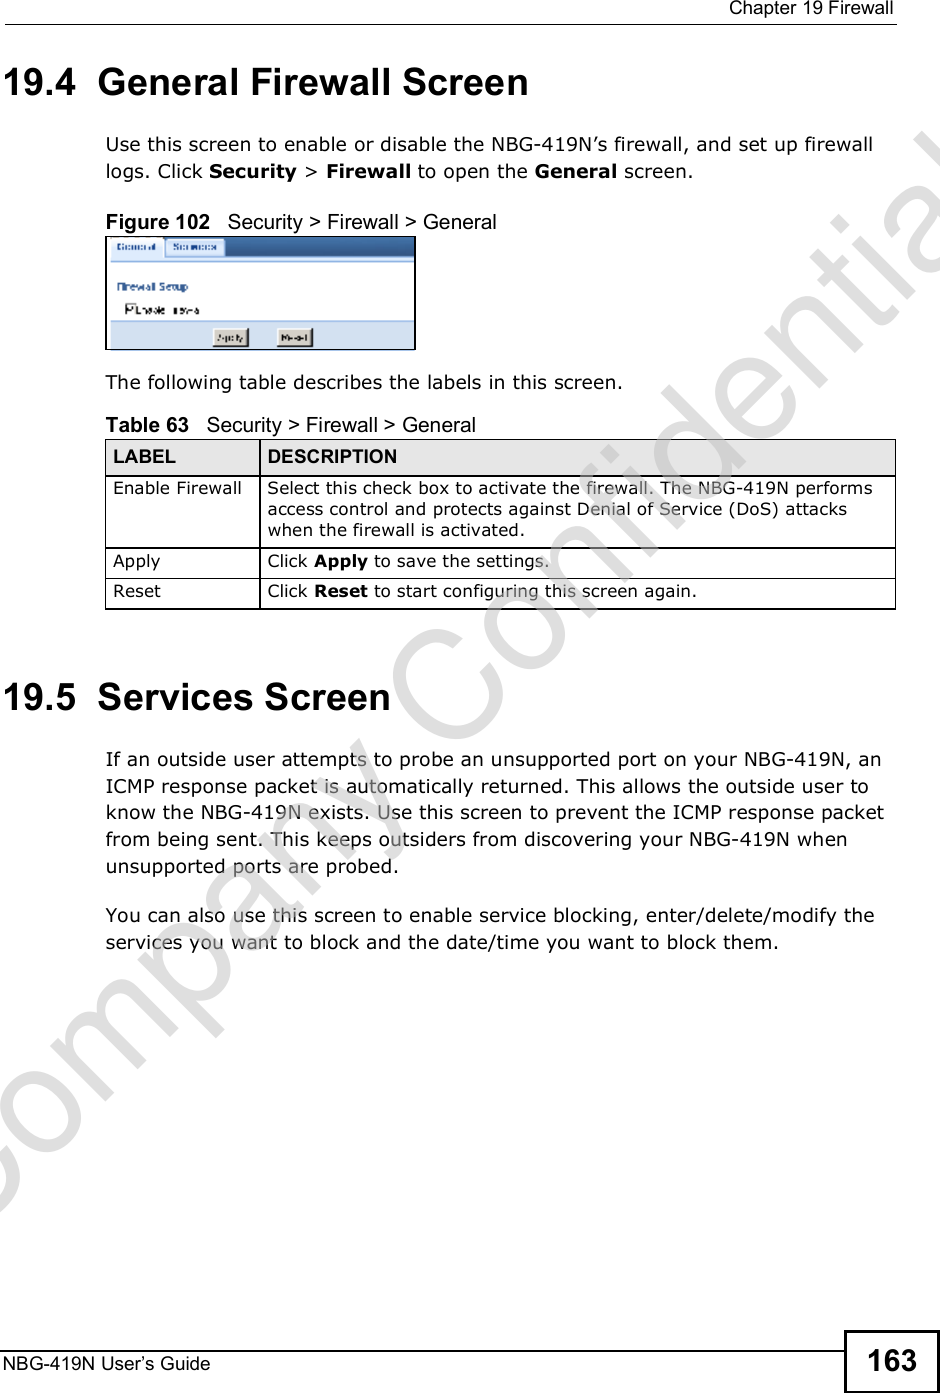  Chapter 19FirewallNBG-419N User s Guide 16319.4  General Firewall Screen   Use this screen to enable or disable the NBG-419N!s firewall, and set up firewall logs. Click Security &gt; Firewall to open the General screen.Figure 102   Security &gt; Firewall &gt; GeneralThe following table describes the labels in this screen.19.5  Services Screen   If an outside user attempts to probe an unsupported port on your NBG-419N, an ICMP response packet is automatically returned. This allows the outside user to know the NBG-419N exists. Use this screen to prevent the ICMP response packet from being sent. This keeps outsiders from discovering your NBG-419N when unsupported ports are probed.You can also use this screen to enable service blocking, enter/delete/modify the services you want to block and the date/time you want to block them.Table 63   Security &gt; Firewall &gt; General LABEL DESCRIPTIONEnable FirewallSelect this check box to activate the firewall. The NBG-419N performs access control and protects against Denial of Service (DoS) attacks when the firewall is activated.Apply Click Apply to save the settings. Reset Click Reset to start configuring this screen again. Company Confidential